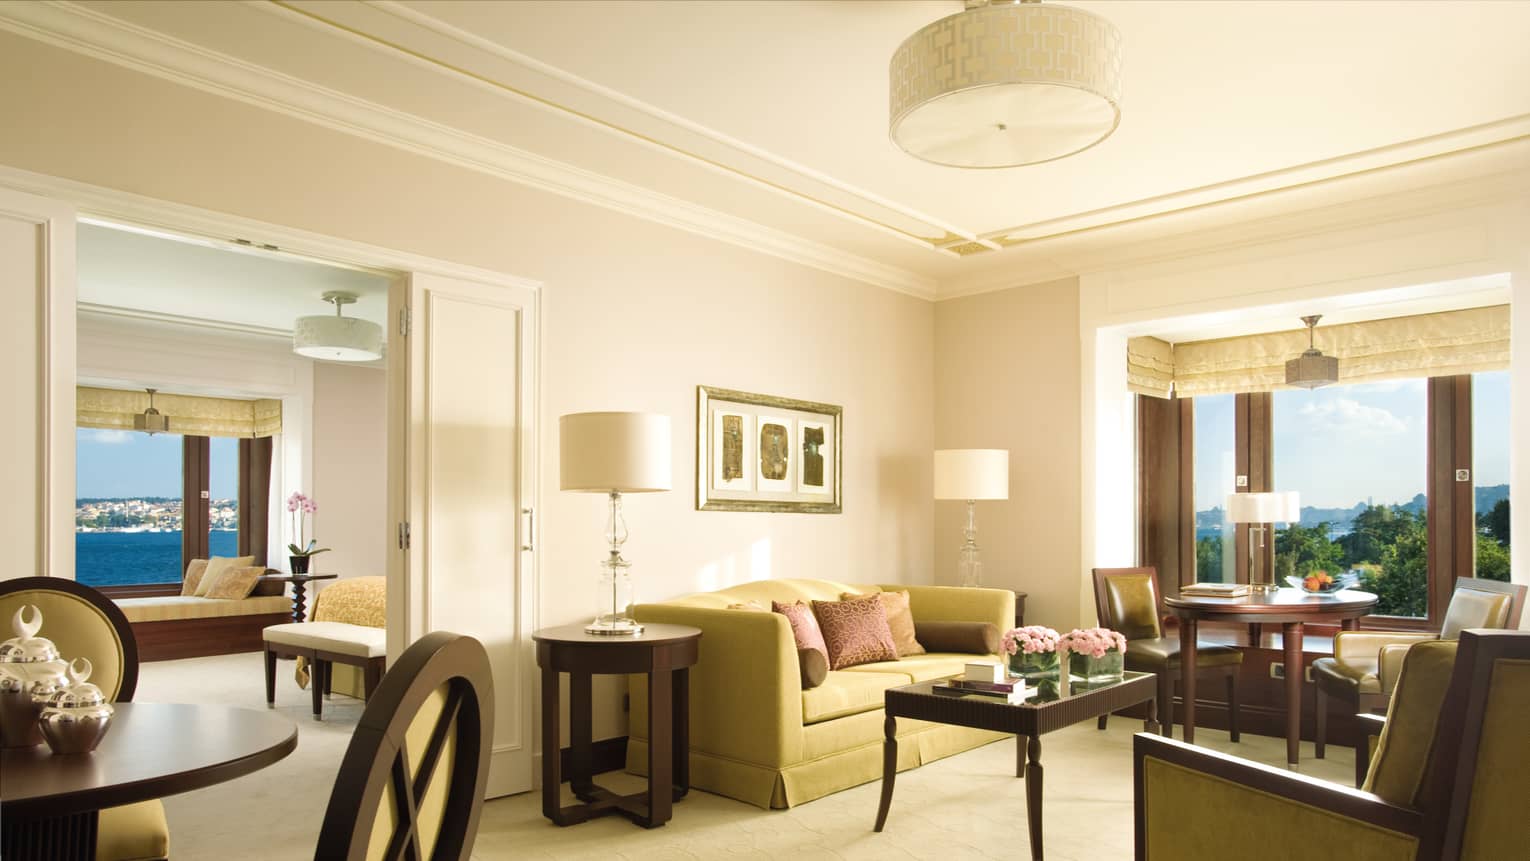 Bosphorus Suite seating area, small round dining table in front of bay windows, bedroom doors